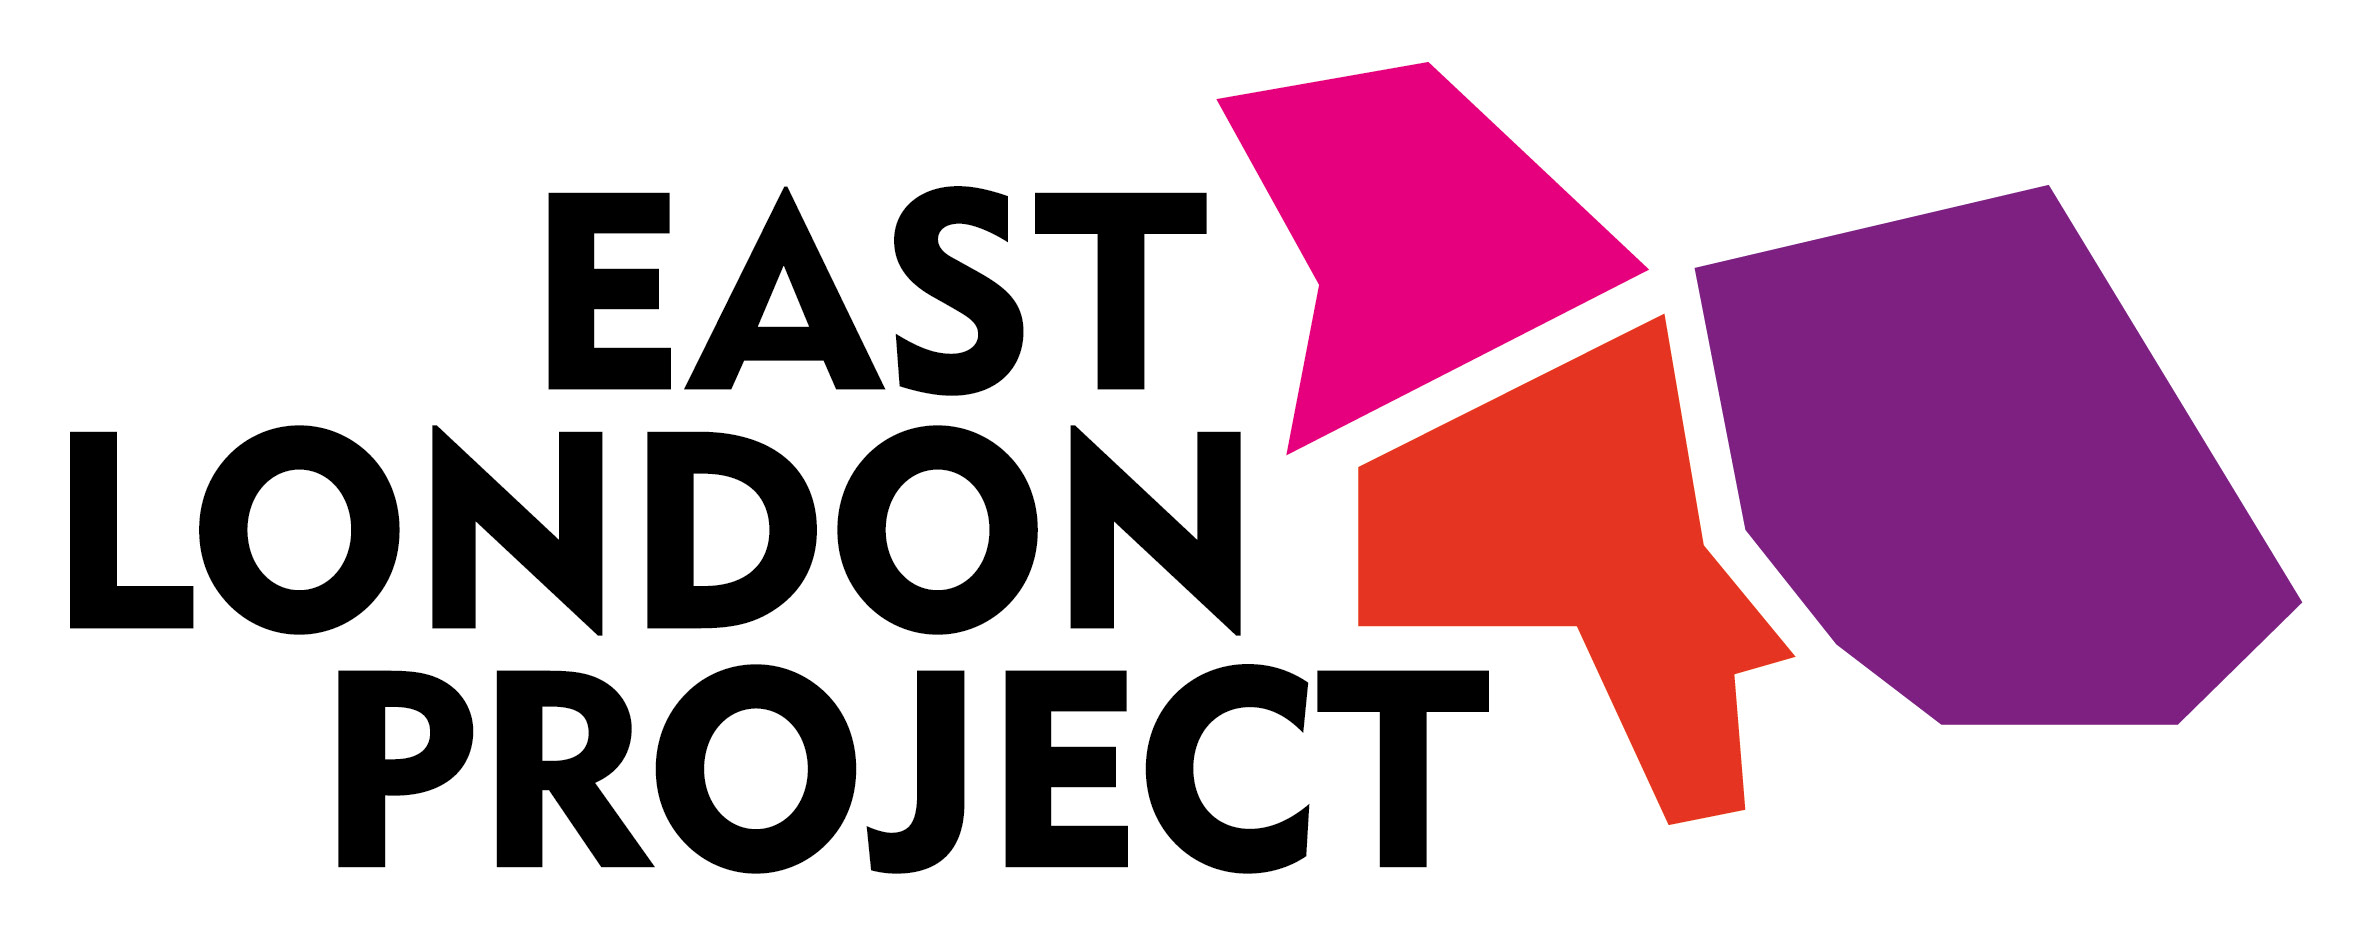 The East London Project